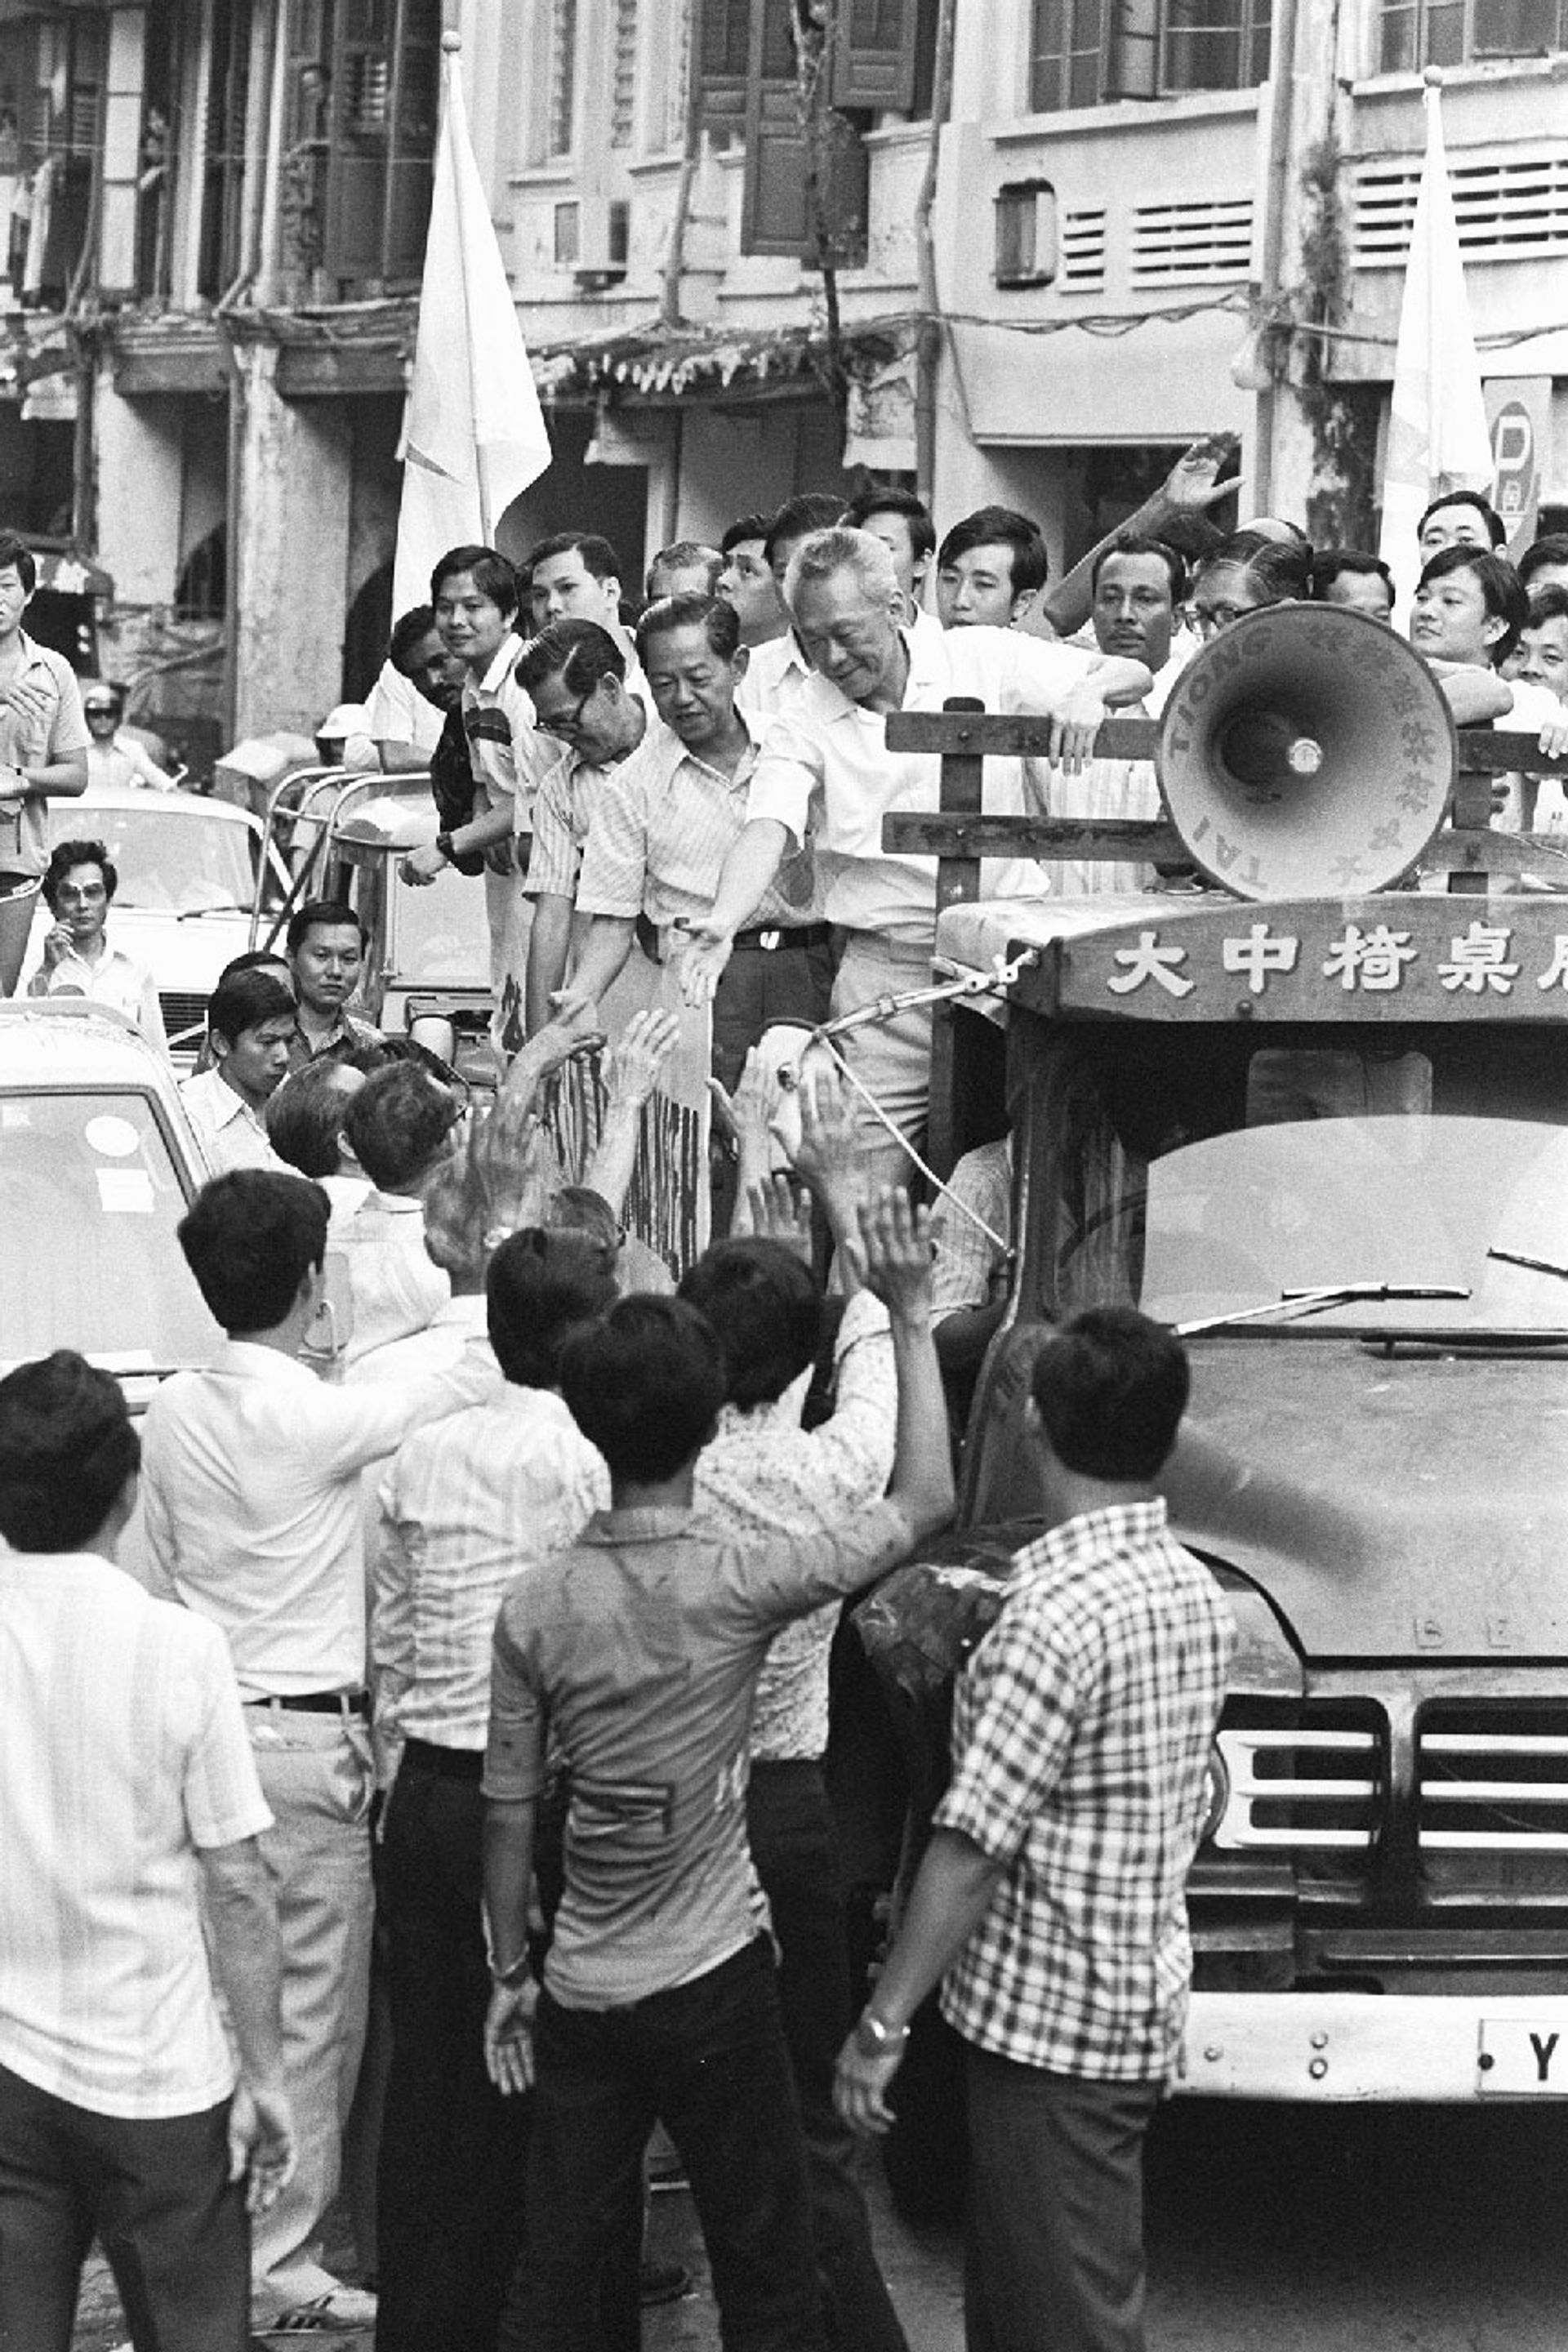 Mr Lee shaking the hands of Tanjong Pagar residents during his victory parade on Dec 24, 1980. ST Photo: Francis Ong